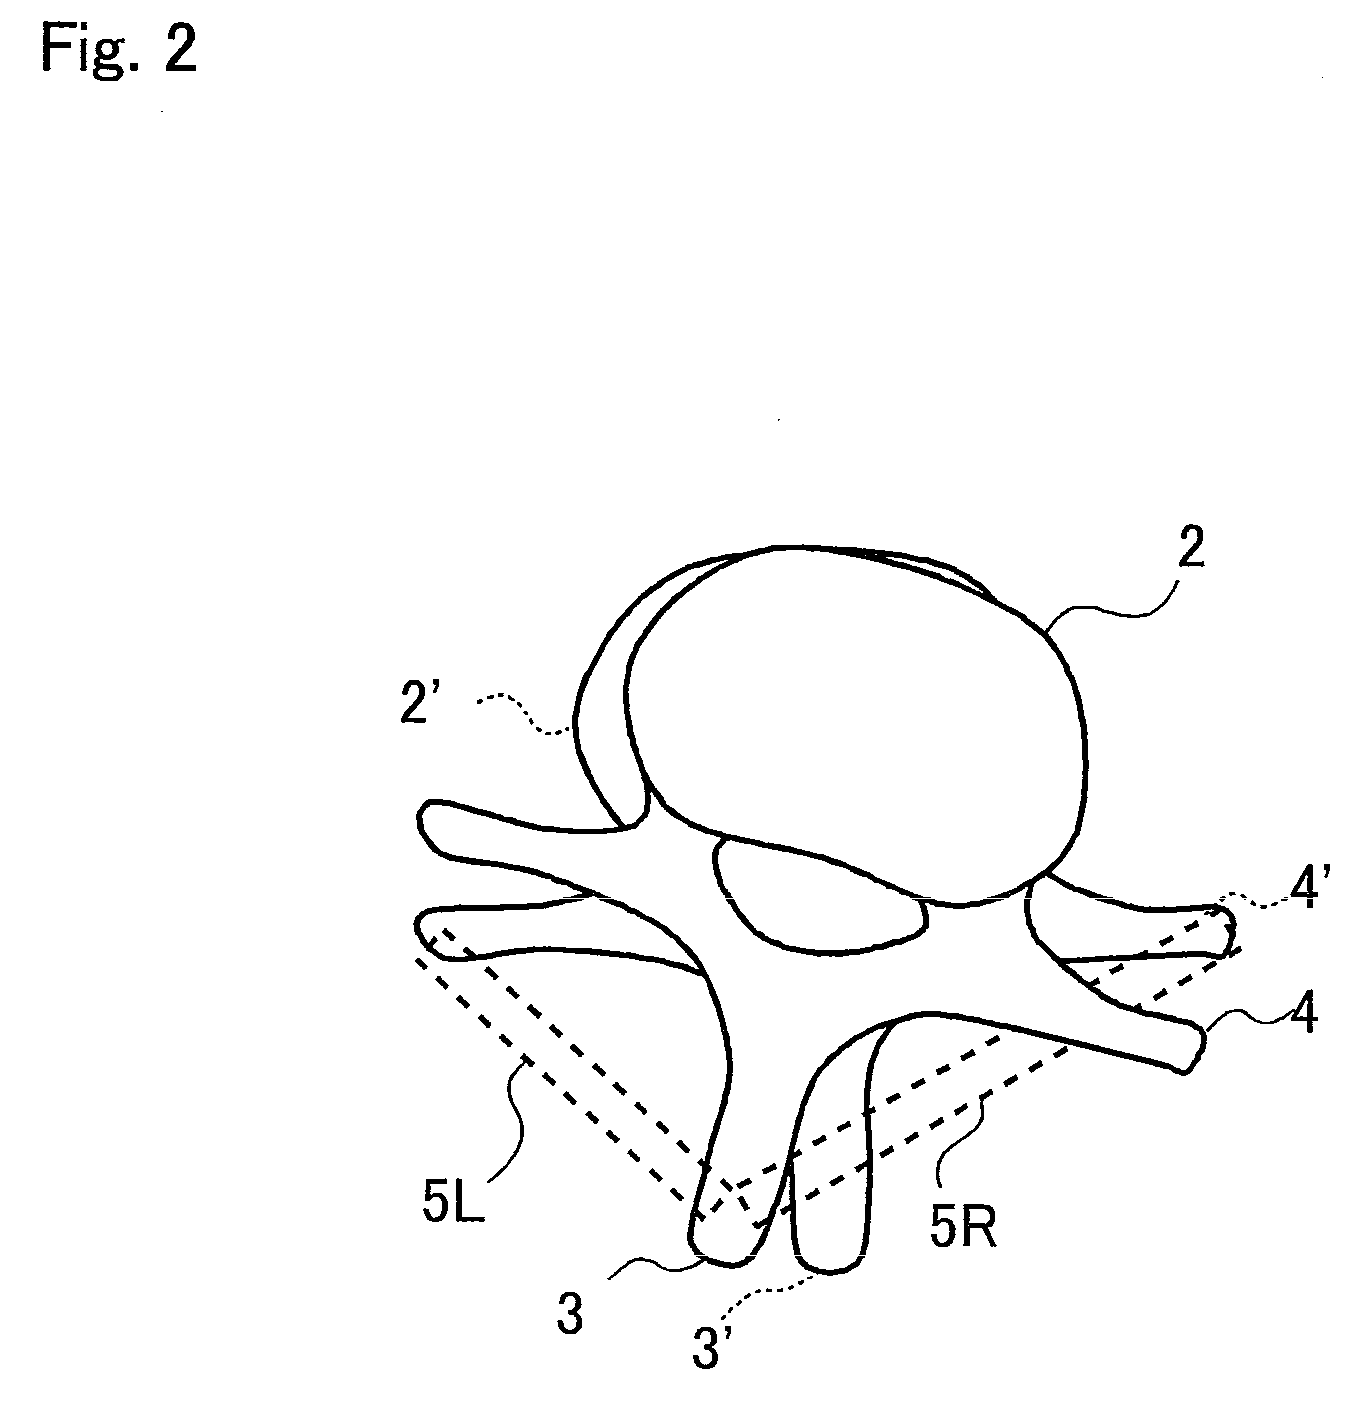 Spinal correction device